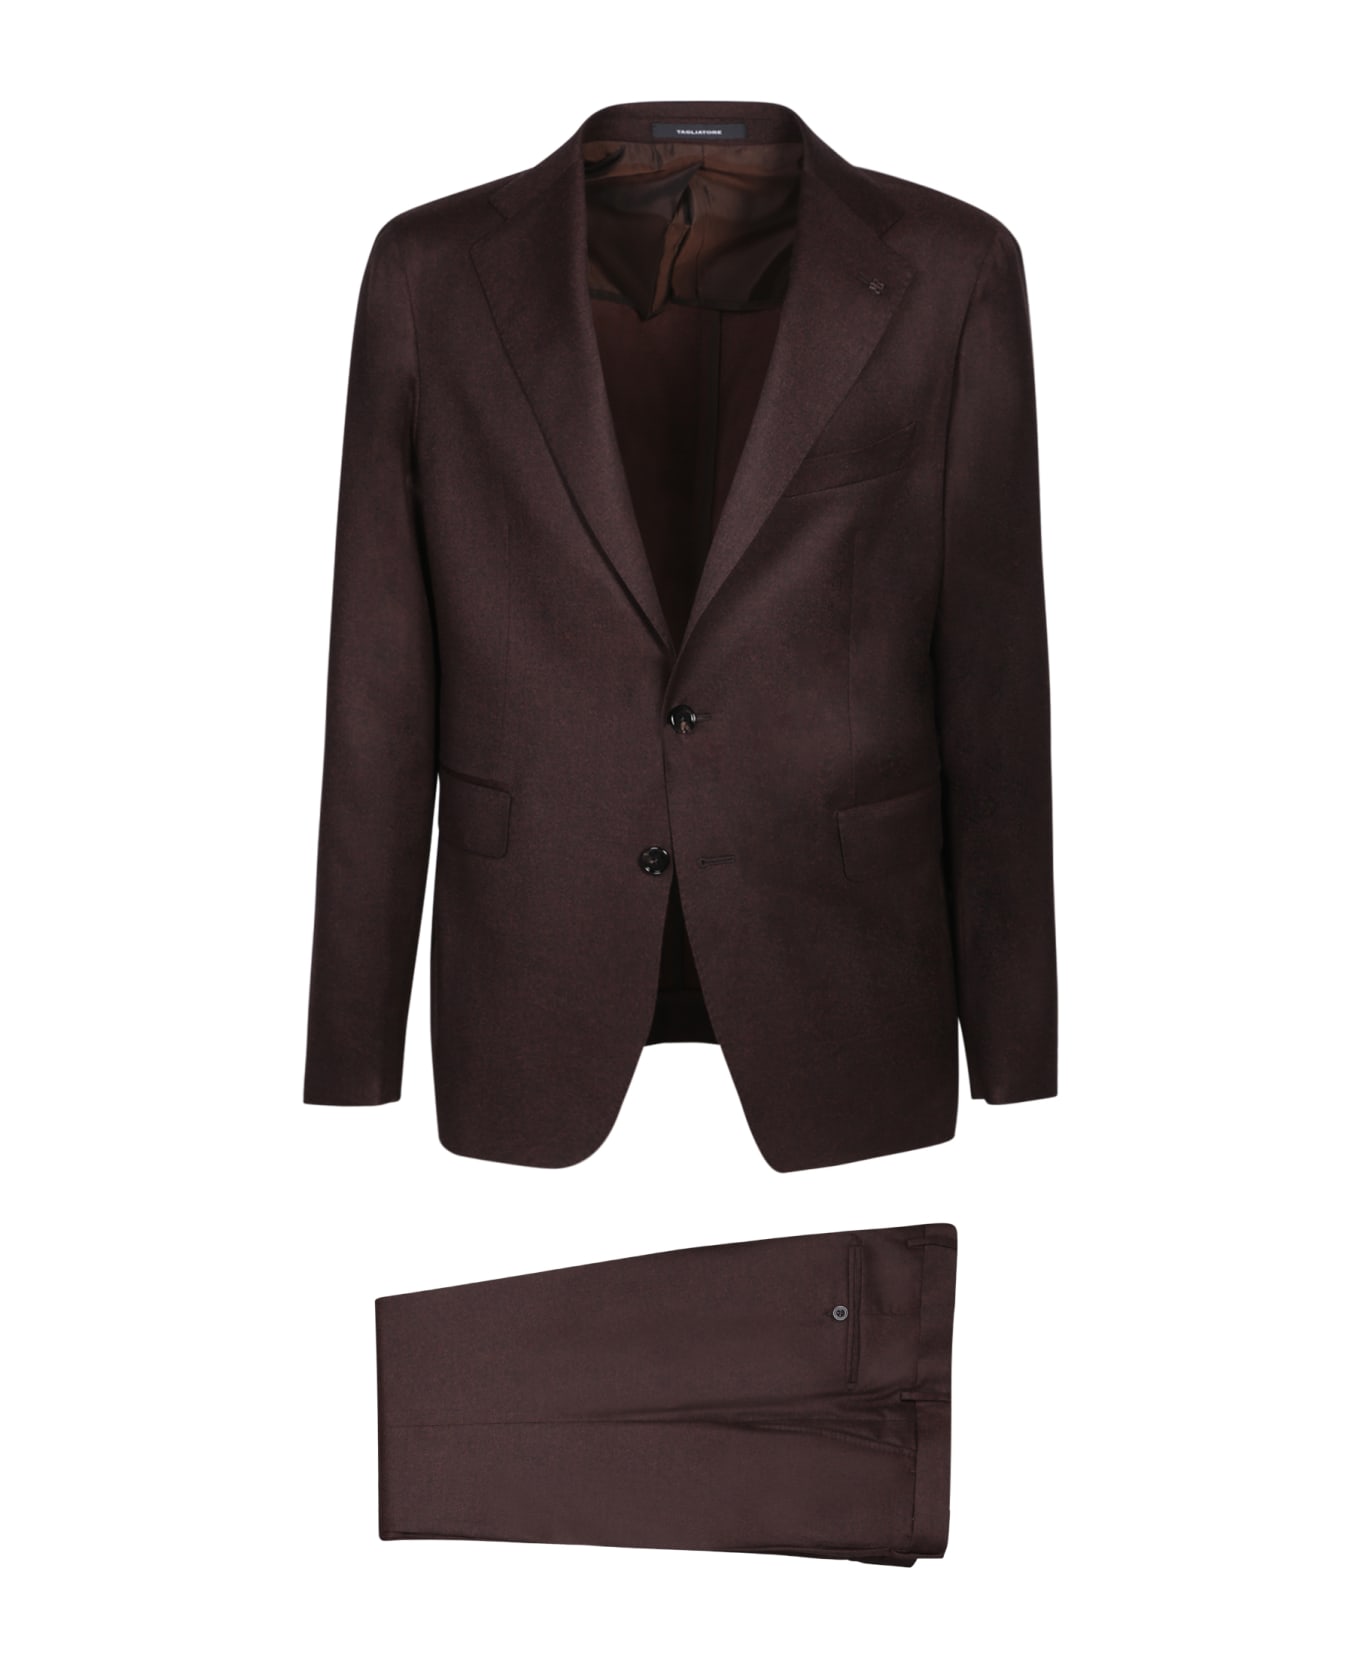 Tagliatore Single-breasted Brown Suit - Brown